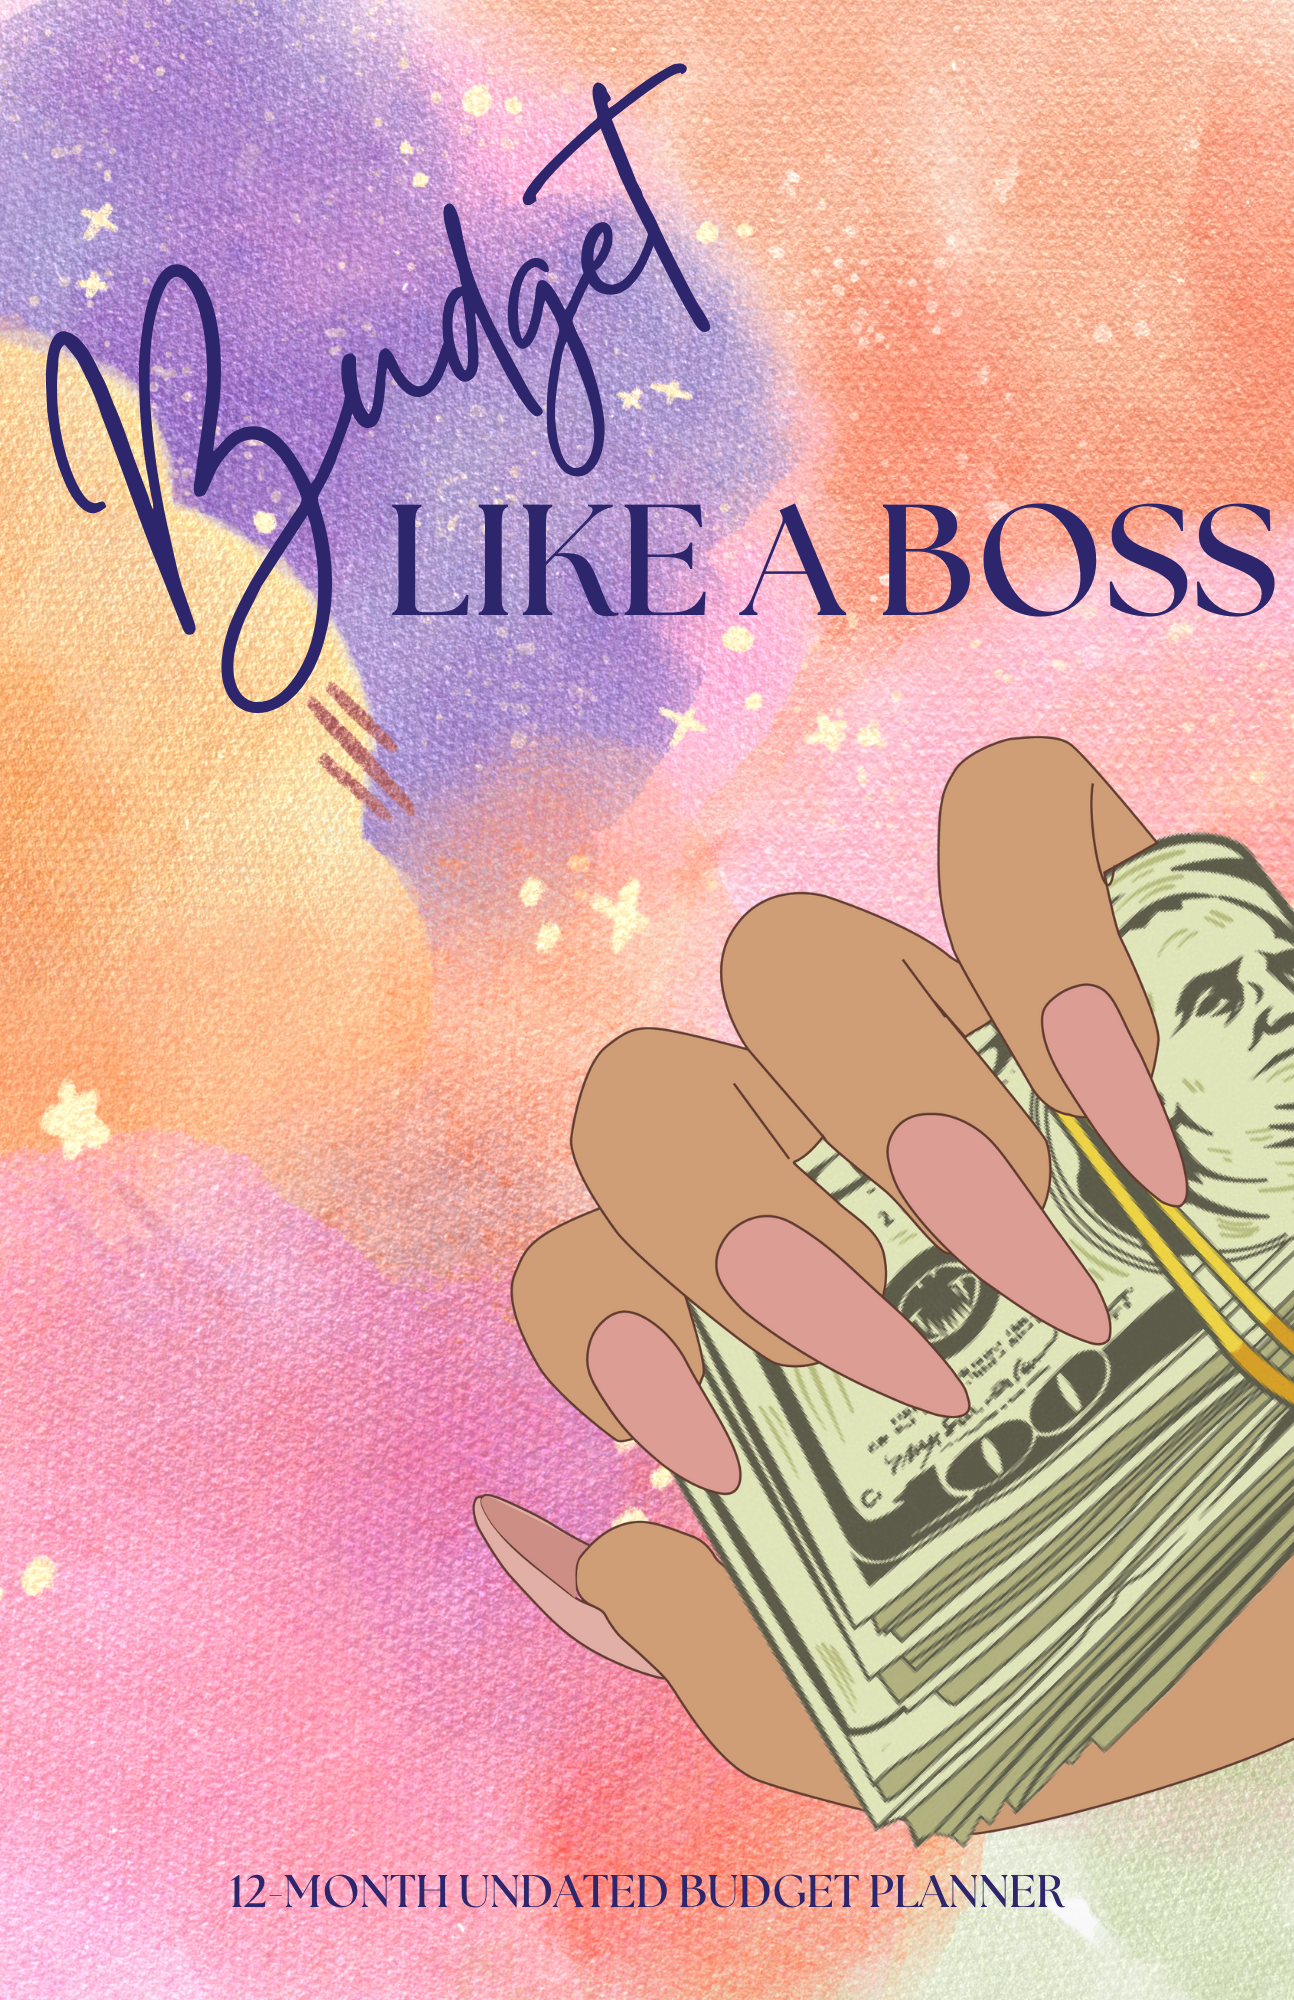 'Budget Like a Boss' Budget Planner: Featuring Watercolor Cover Design, Monthly Calendars, Budget Worksheets, & More!